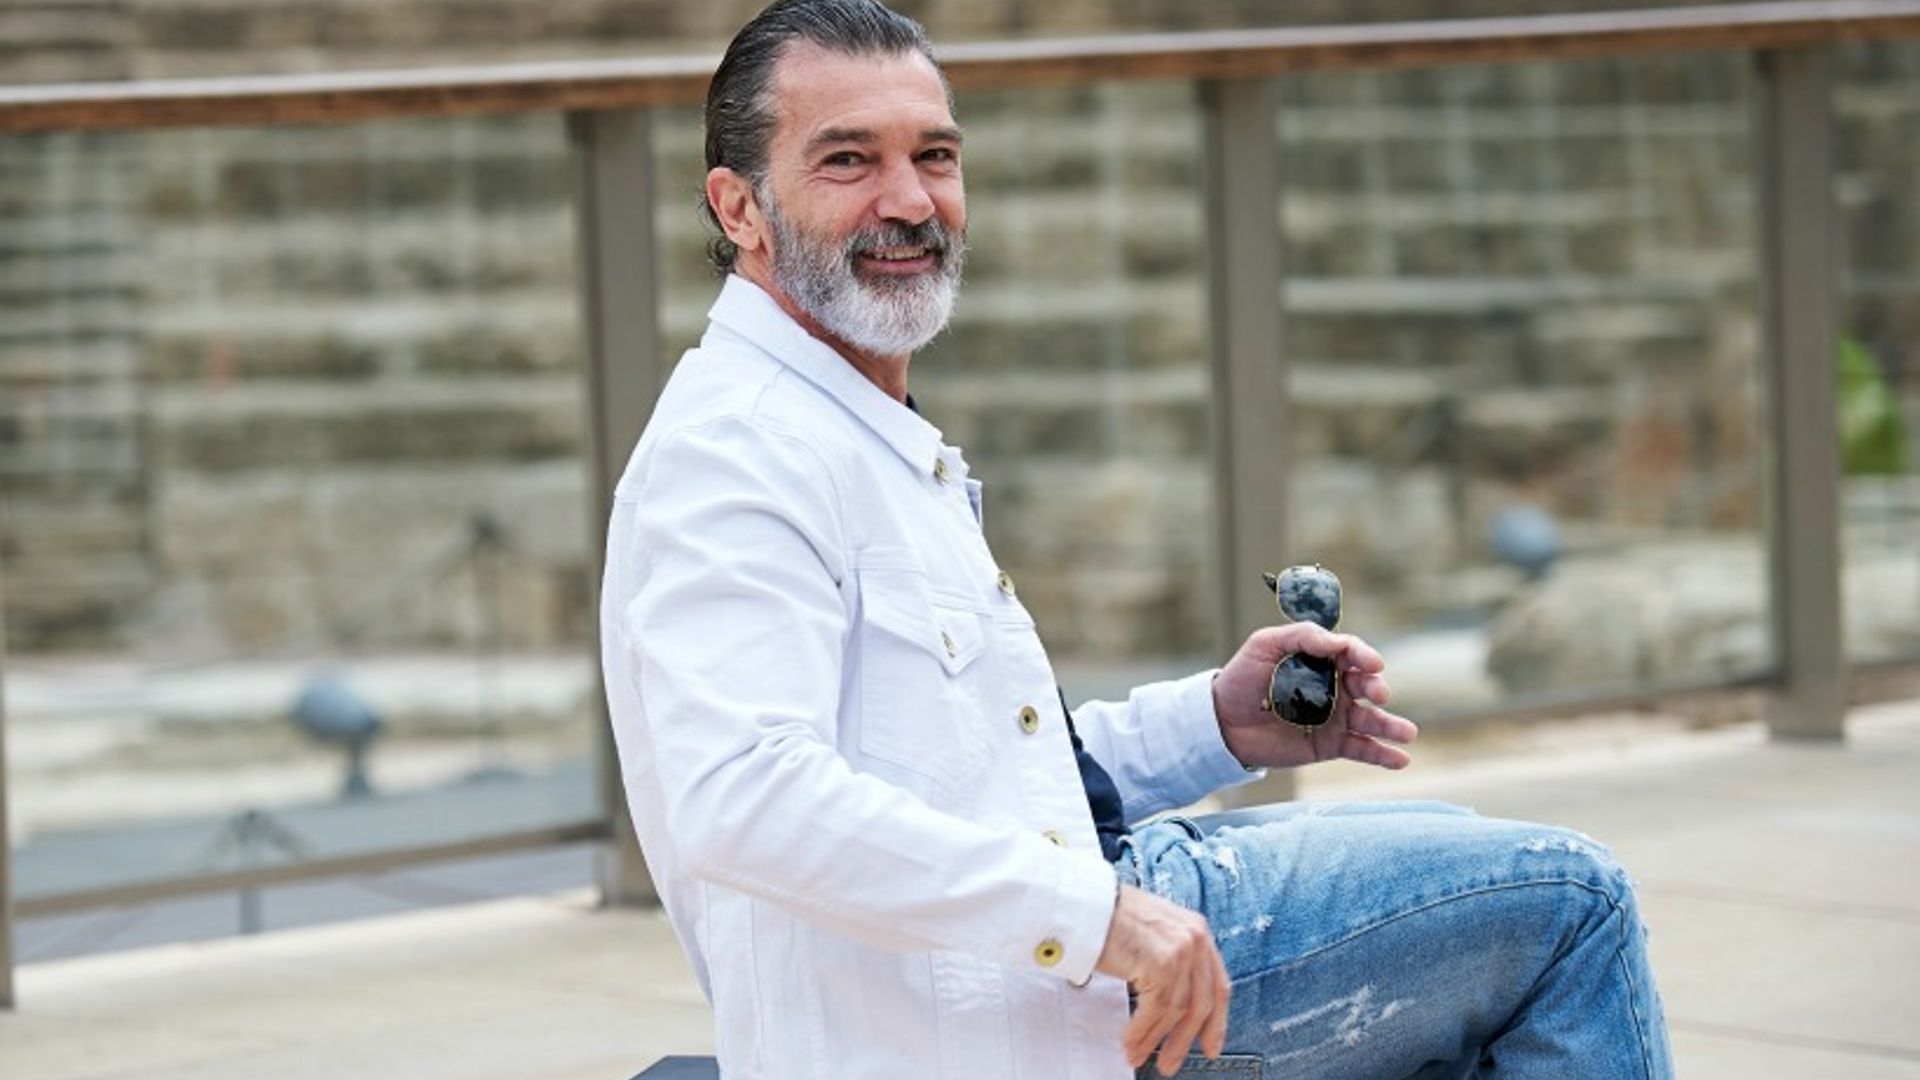 Antonio Banderas reveals he suffered a heart attack: 'It wasn't serious'